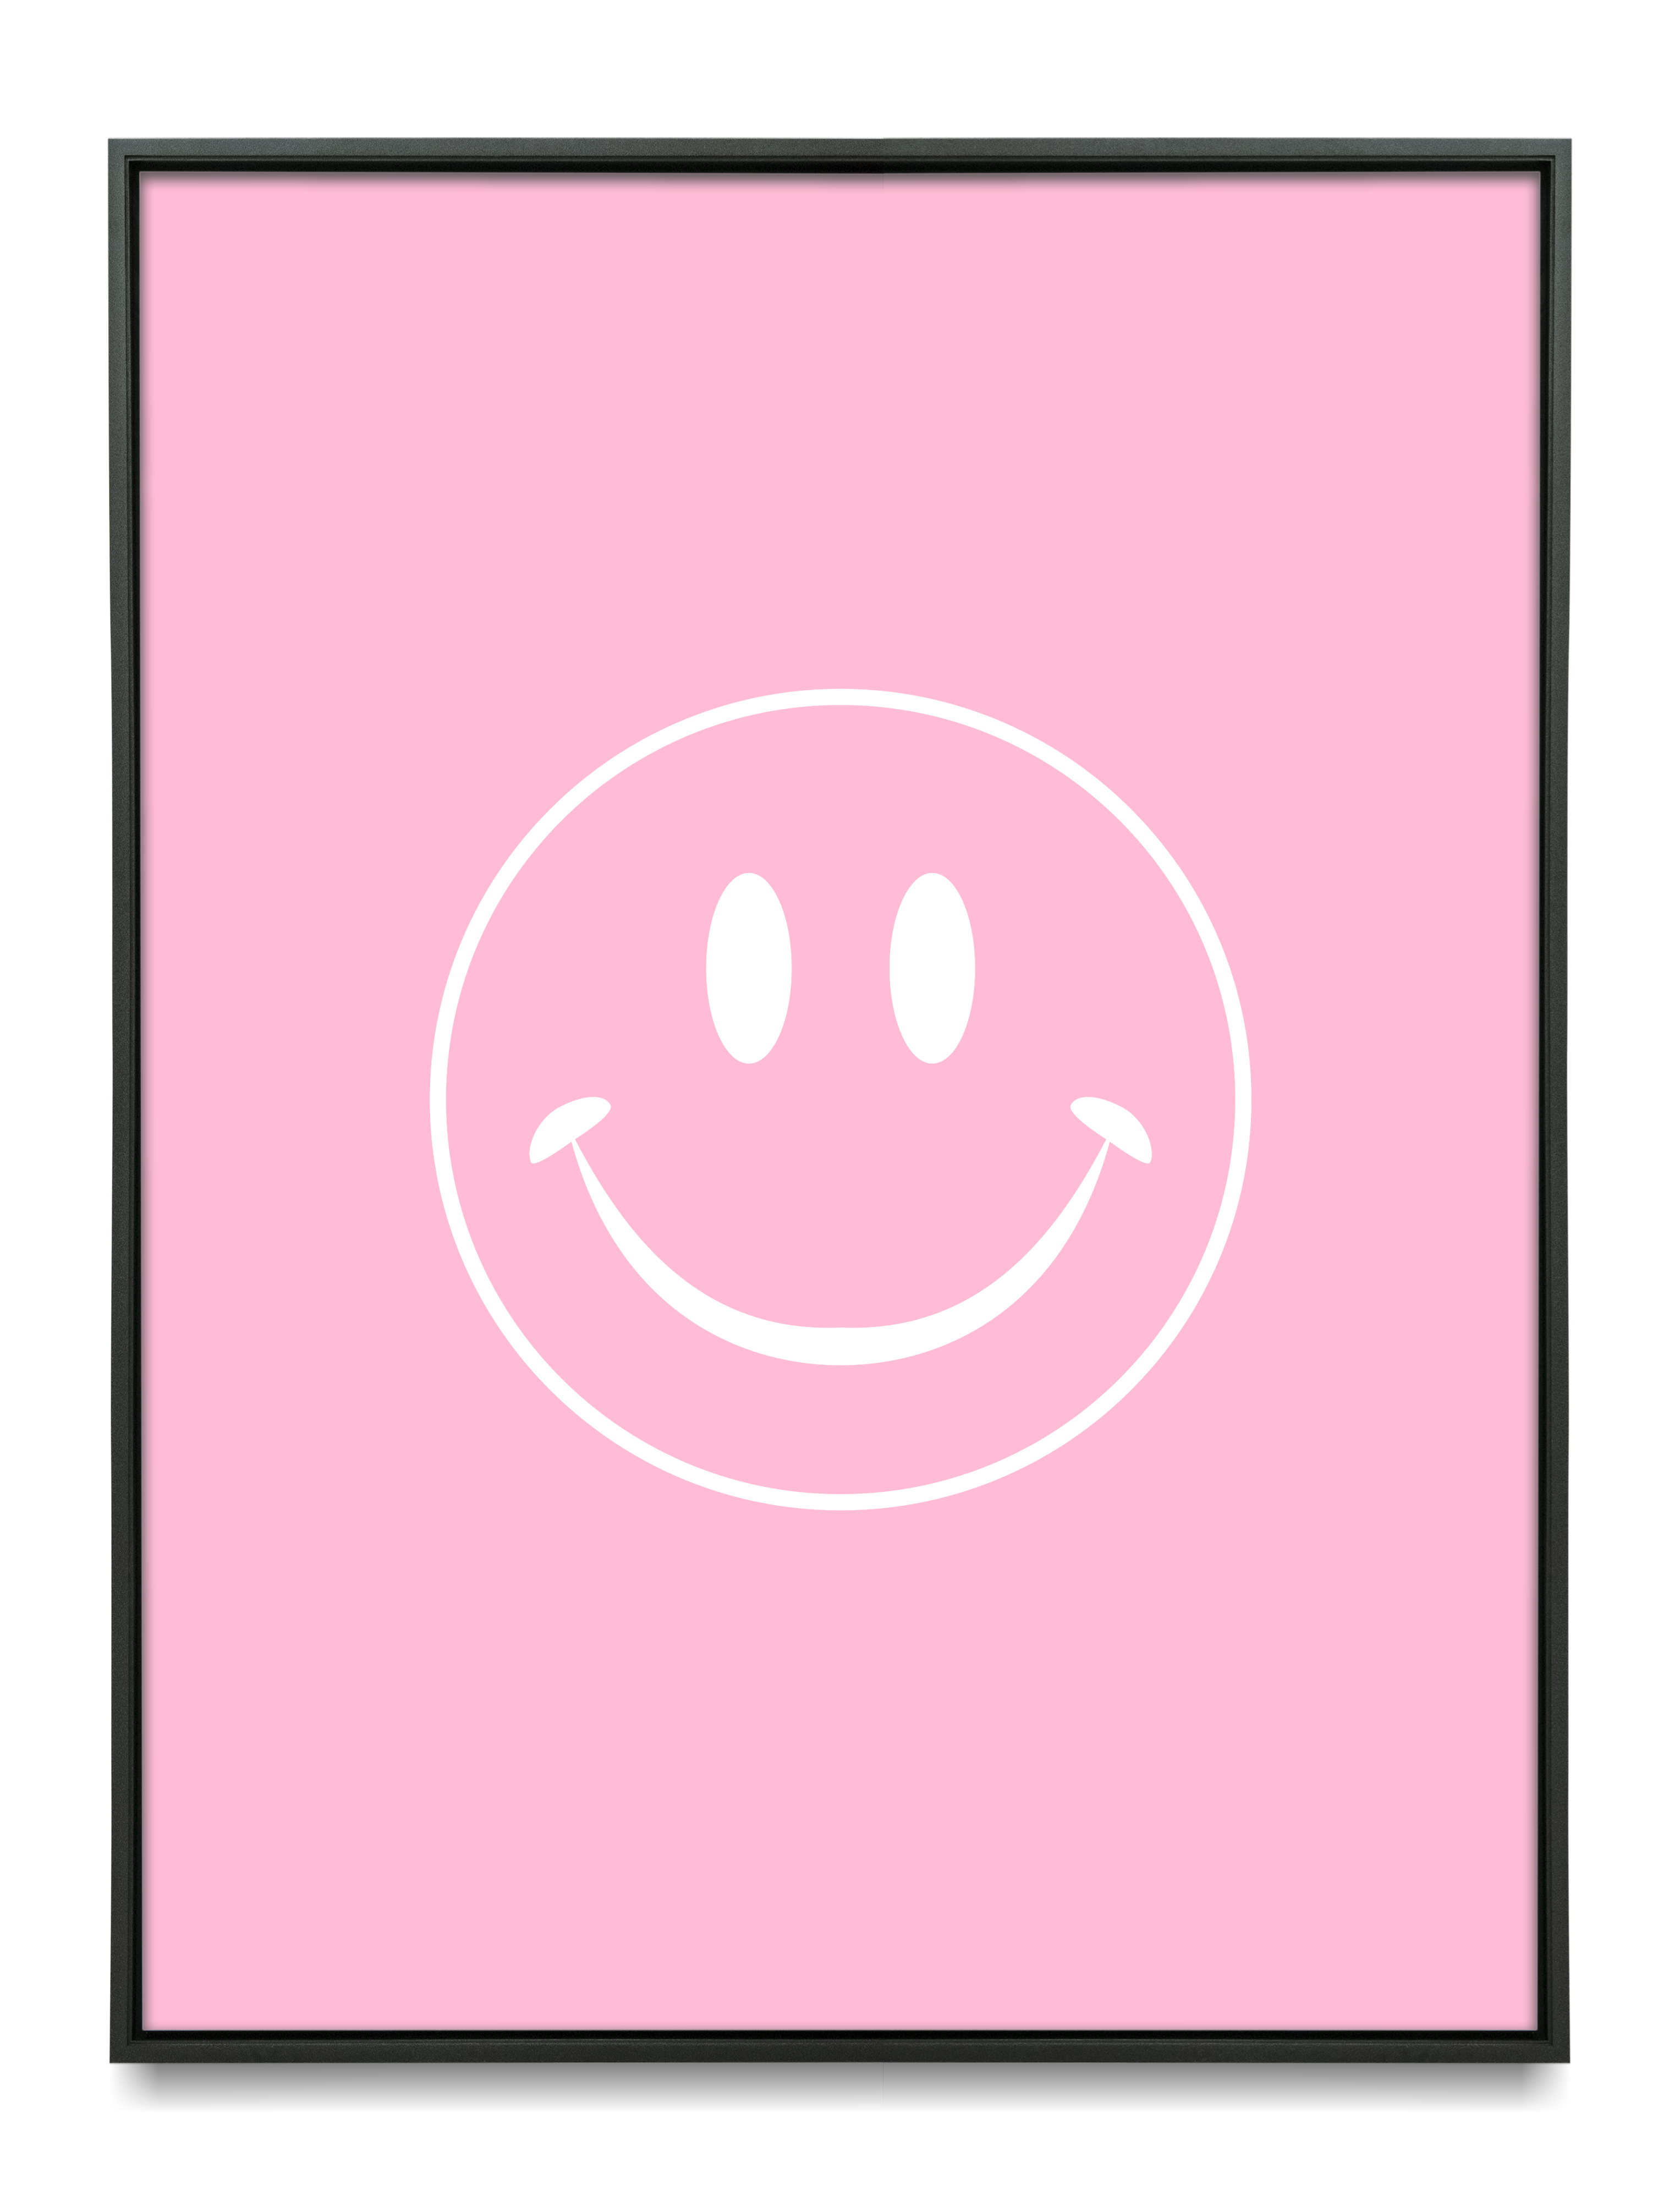 Cute Smiley Face Poster for Room | Bedroom Posters & Preppy Room Decor | Danish Pastel Aesthetic Poster Wall Decor | UNFRAMED